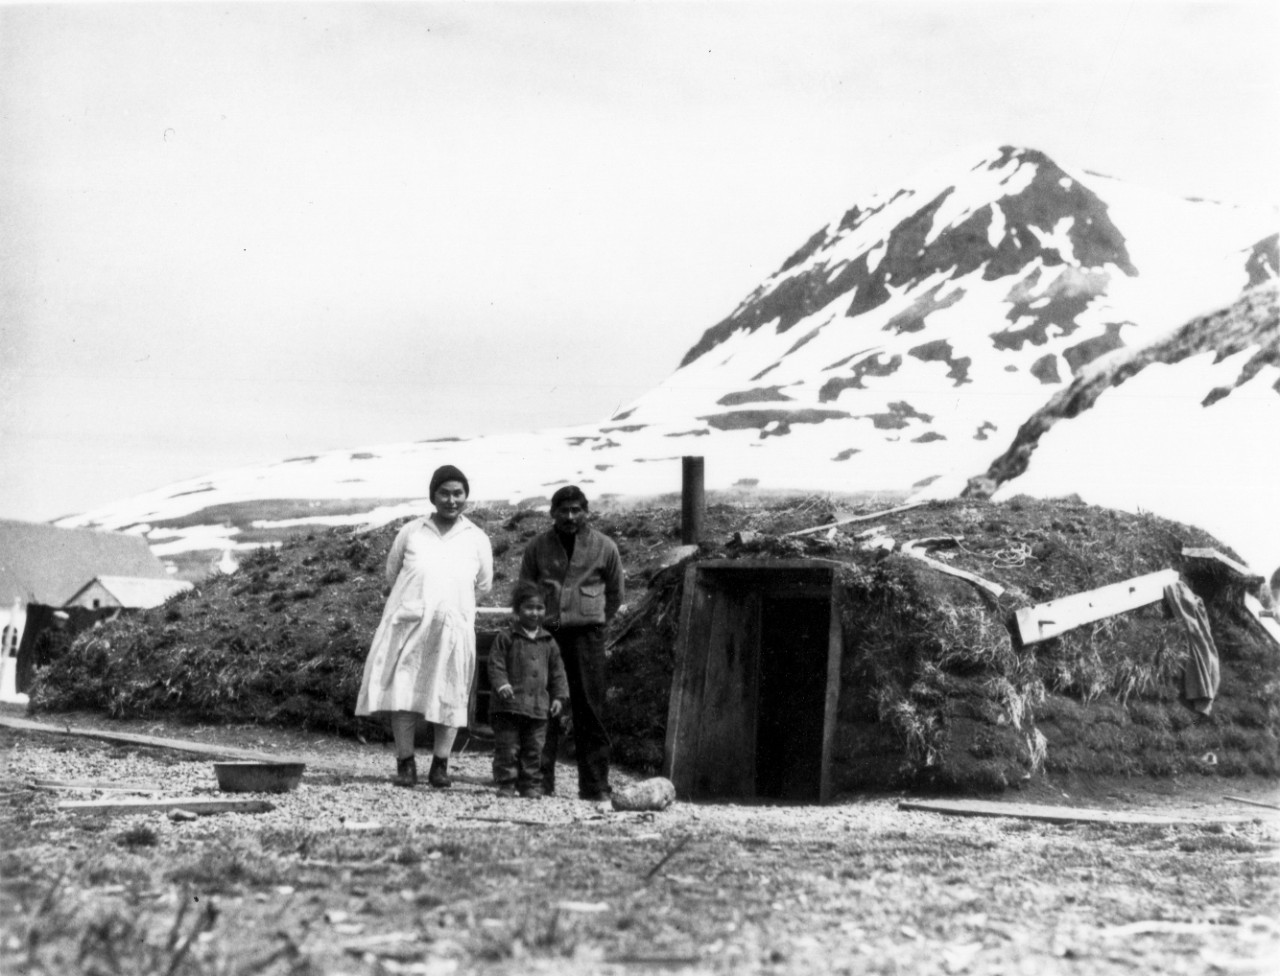 <p>UA 437.04.010 A Typical &quot;burraburra&quot; or underground dwelling used by the Aleuts. The man is Mike Hodikoff, Chief of Attu Village. In recent years the white traders have built frame houses in the islands and the &quot;burraburras&quot; are to some extent being abandodned; but they are easier to heat and safe from violent winds, and many families still prefer them.</p>
